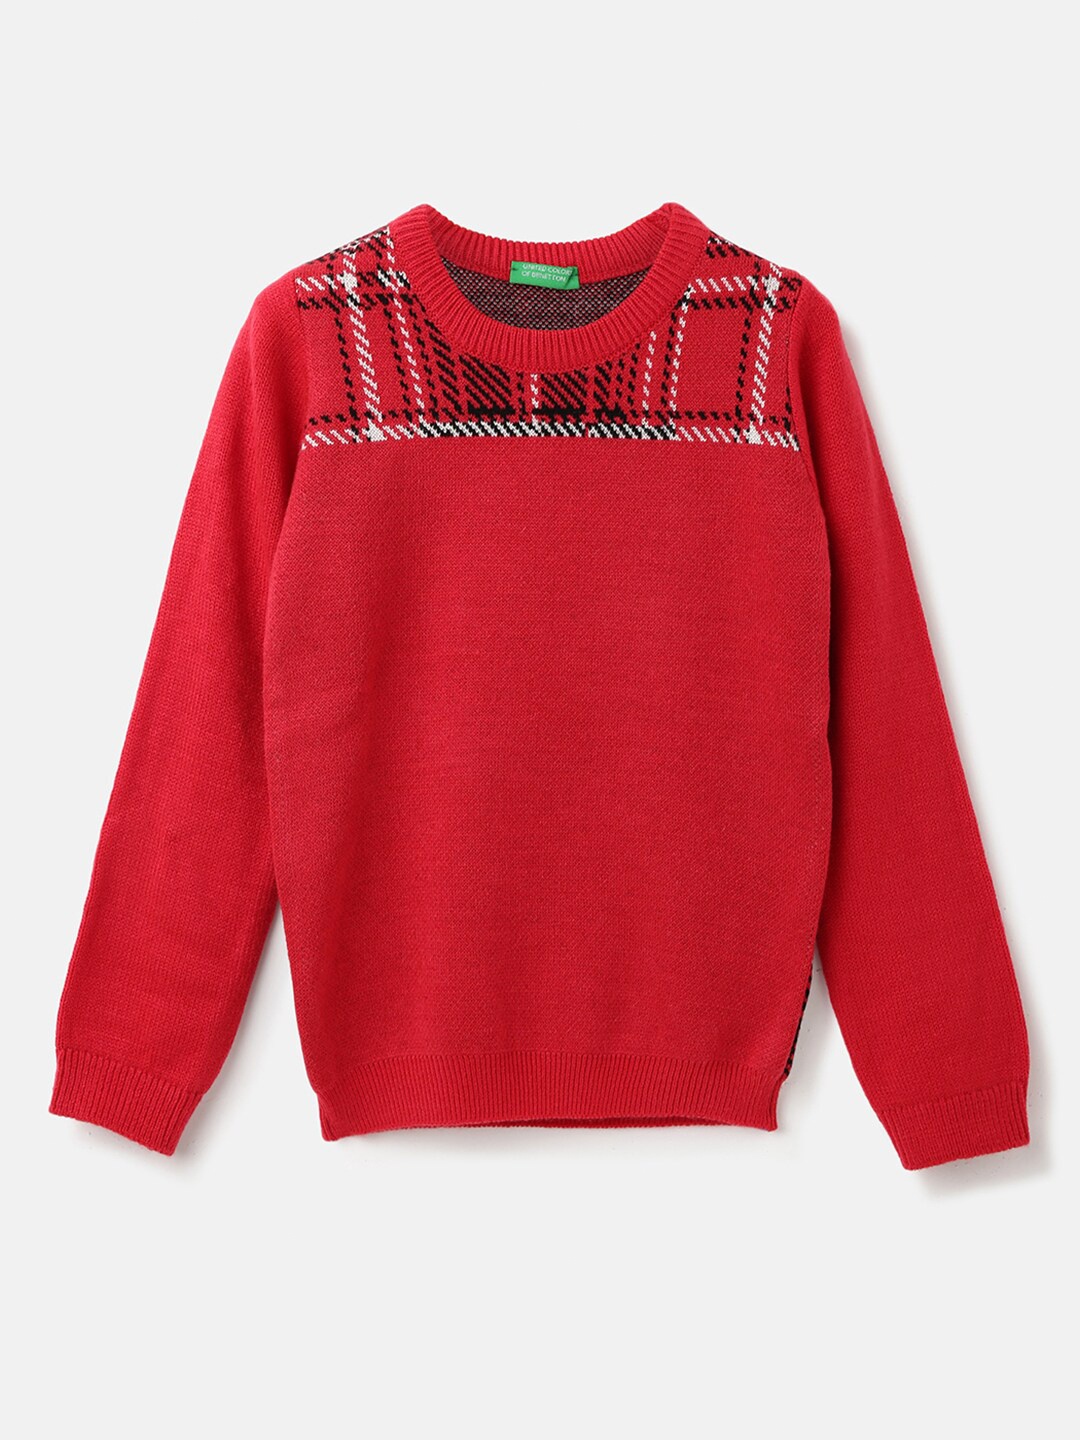 

United Colors of Benetton Boys Checked Pullover Sweater, Red